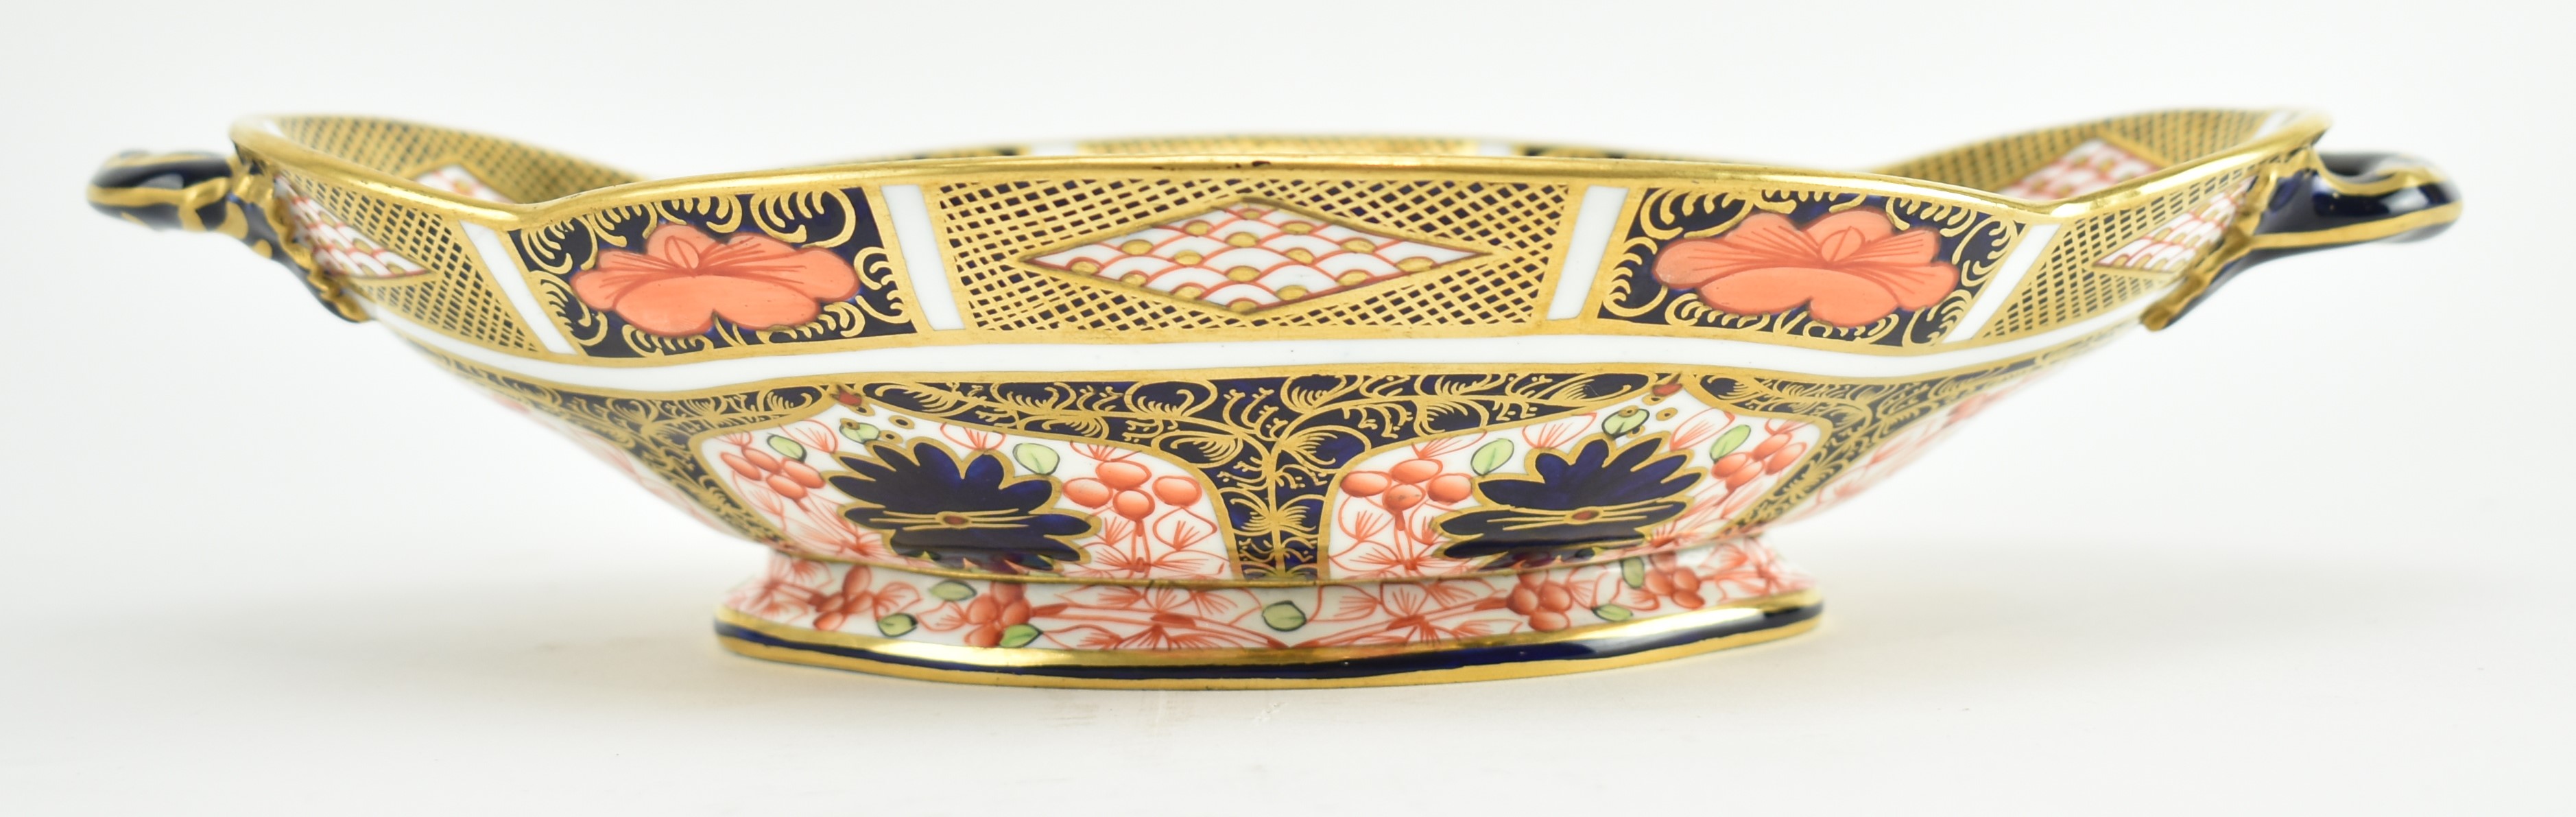 1920S ROYAL CROWN DERBY OLD IMARI DESSERT DISH WITH HANDLES - Image 2 of 6